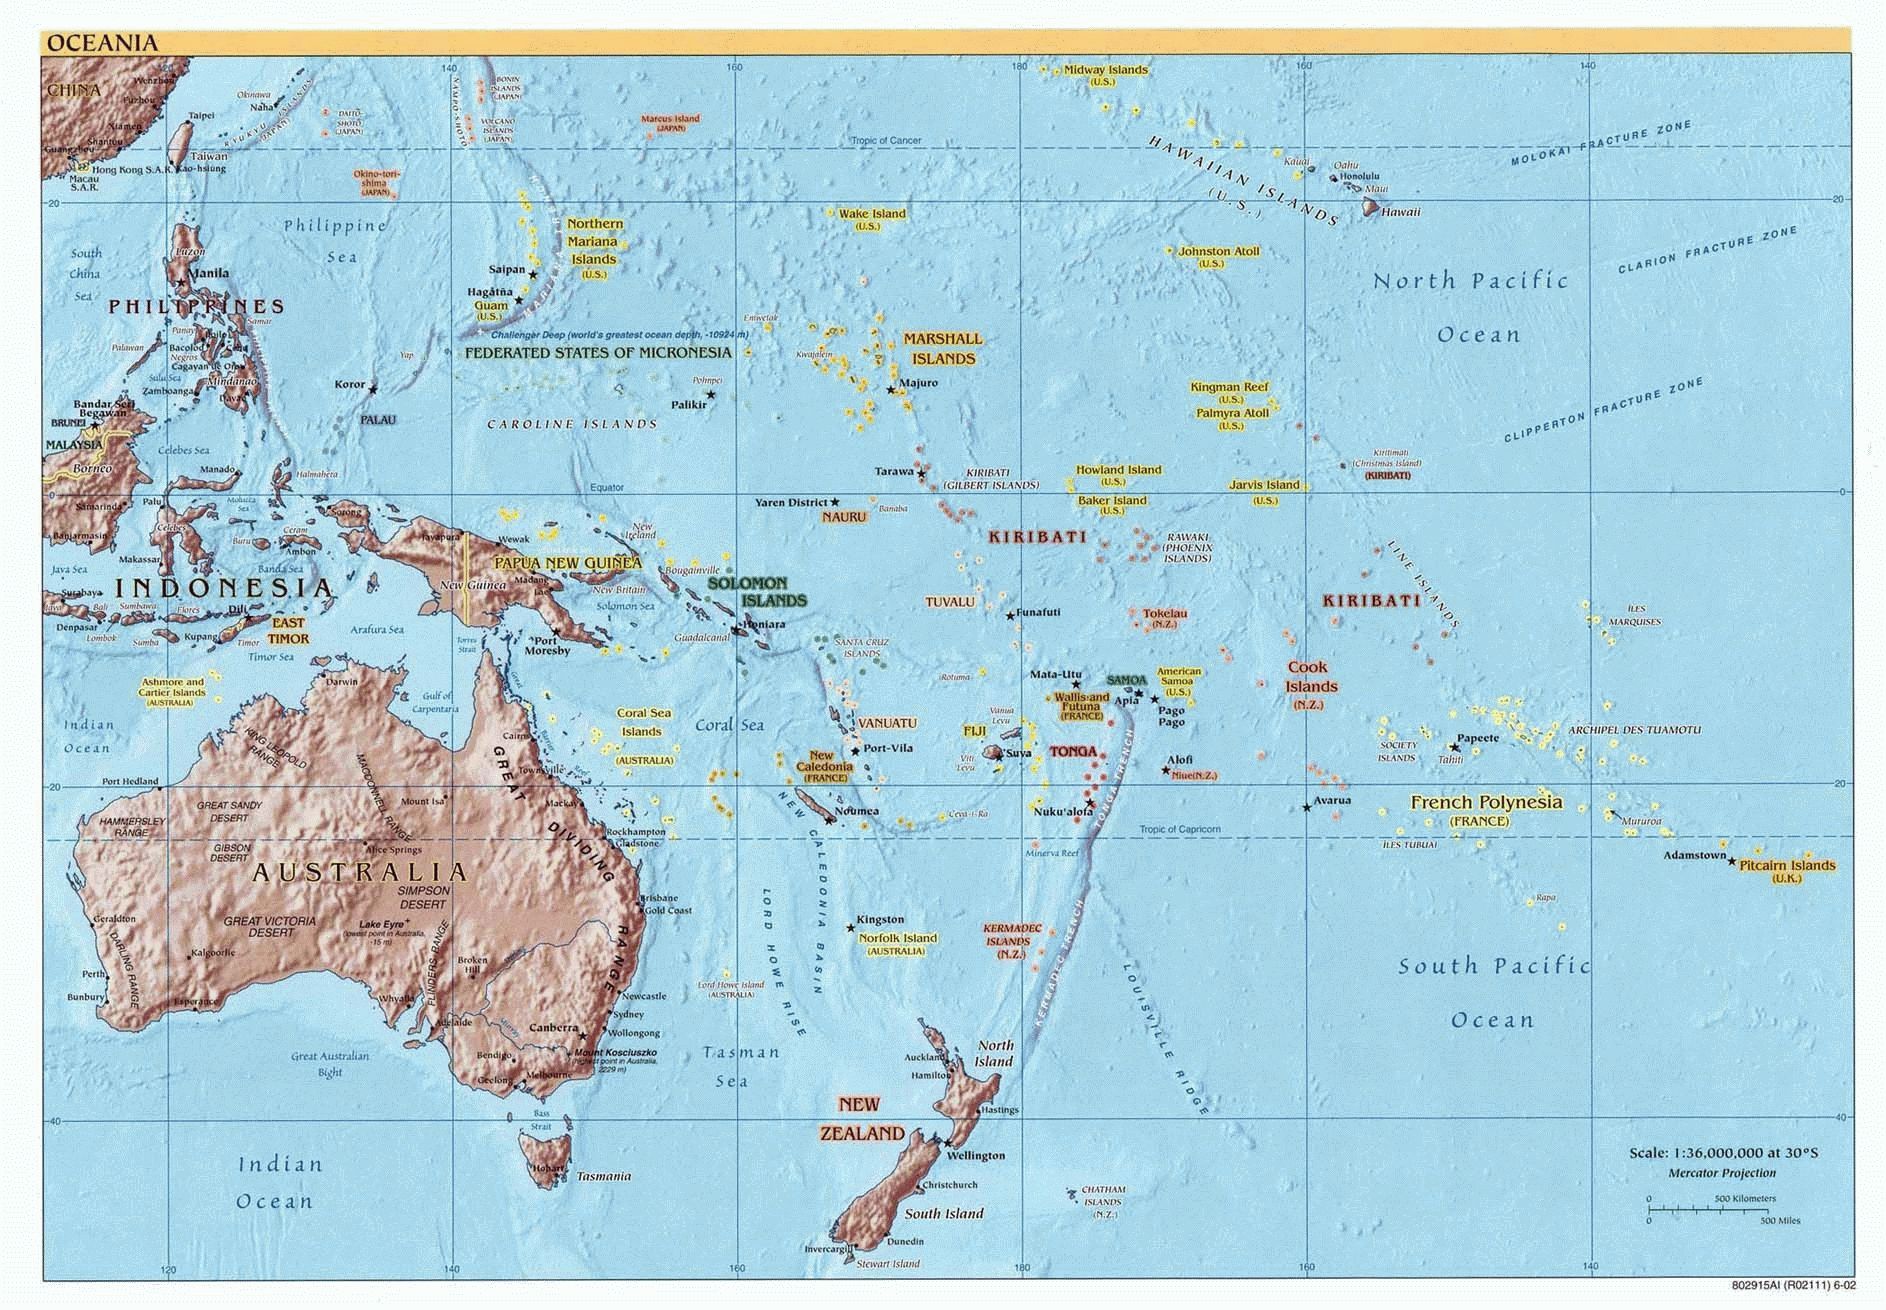 Map of Oceania (Reference), 2002. Courtesy of, The World Factbook (http://cia.gov/cia/publications/factbook) or CIA Maps and Publications Released to the Public (http://www.cia.gov/cia/publications/mapspub), Central Intelligence Agency (CIA), Government of the United States of America (USA); and the Perry-Castaeda Map Collection (http://www.lib.utexas.edu/maps), Perry-Castaeda Library, The General Libraries, University of Texas at Austin, Austin, Texas, USA.